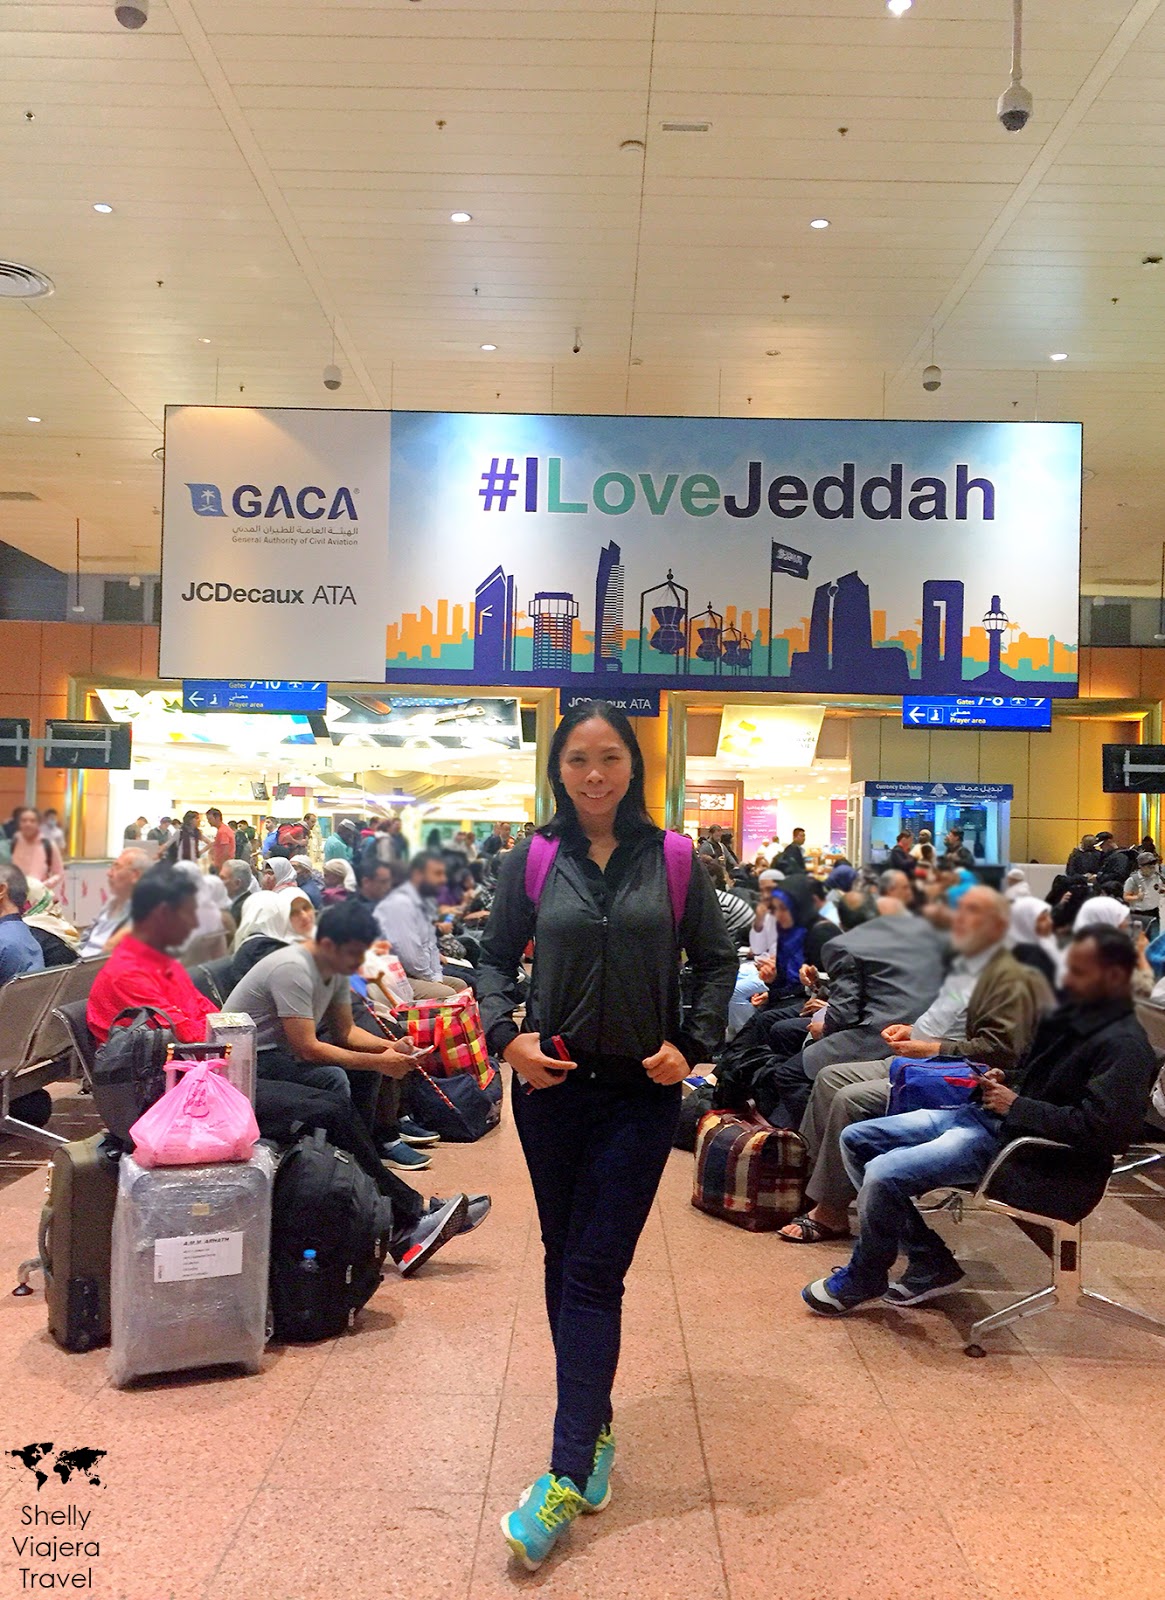 Price philippines saudi airlines to ticket jeddah Jeddah →